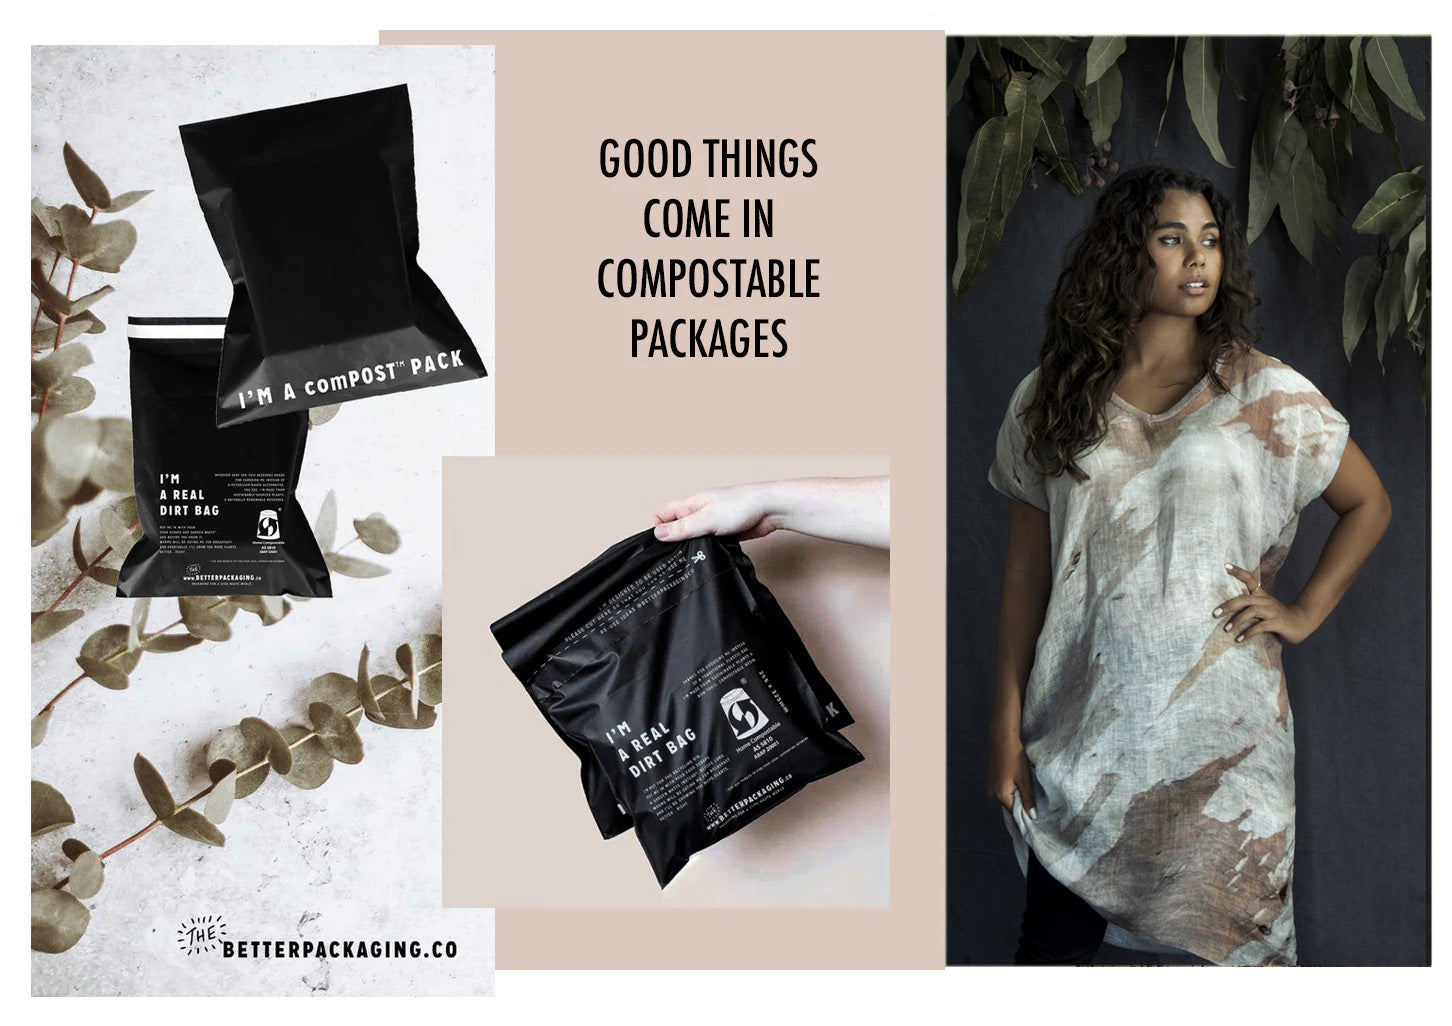 Pictures of compostable packaging and linen dress